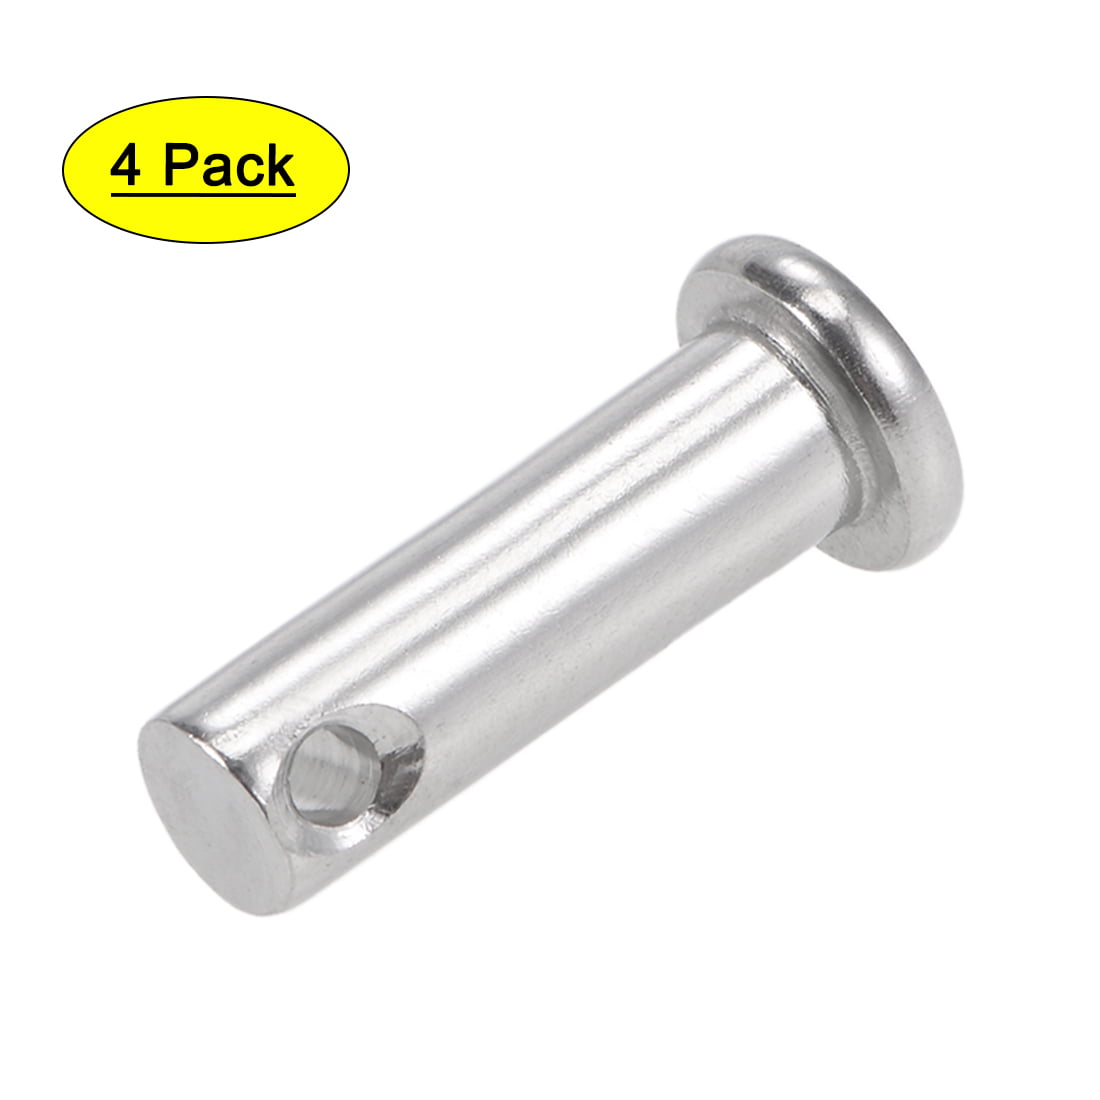 8mm x 25mm Flat Head 304 Stainless Steel Link Hinge Details about   Single Hole Clevis Pins